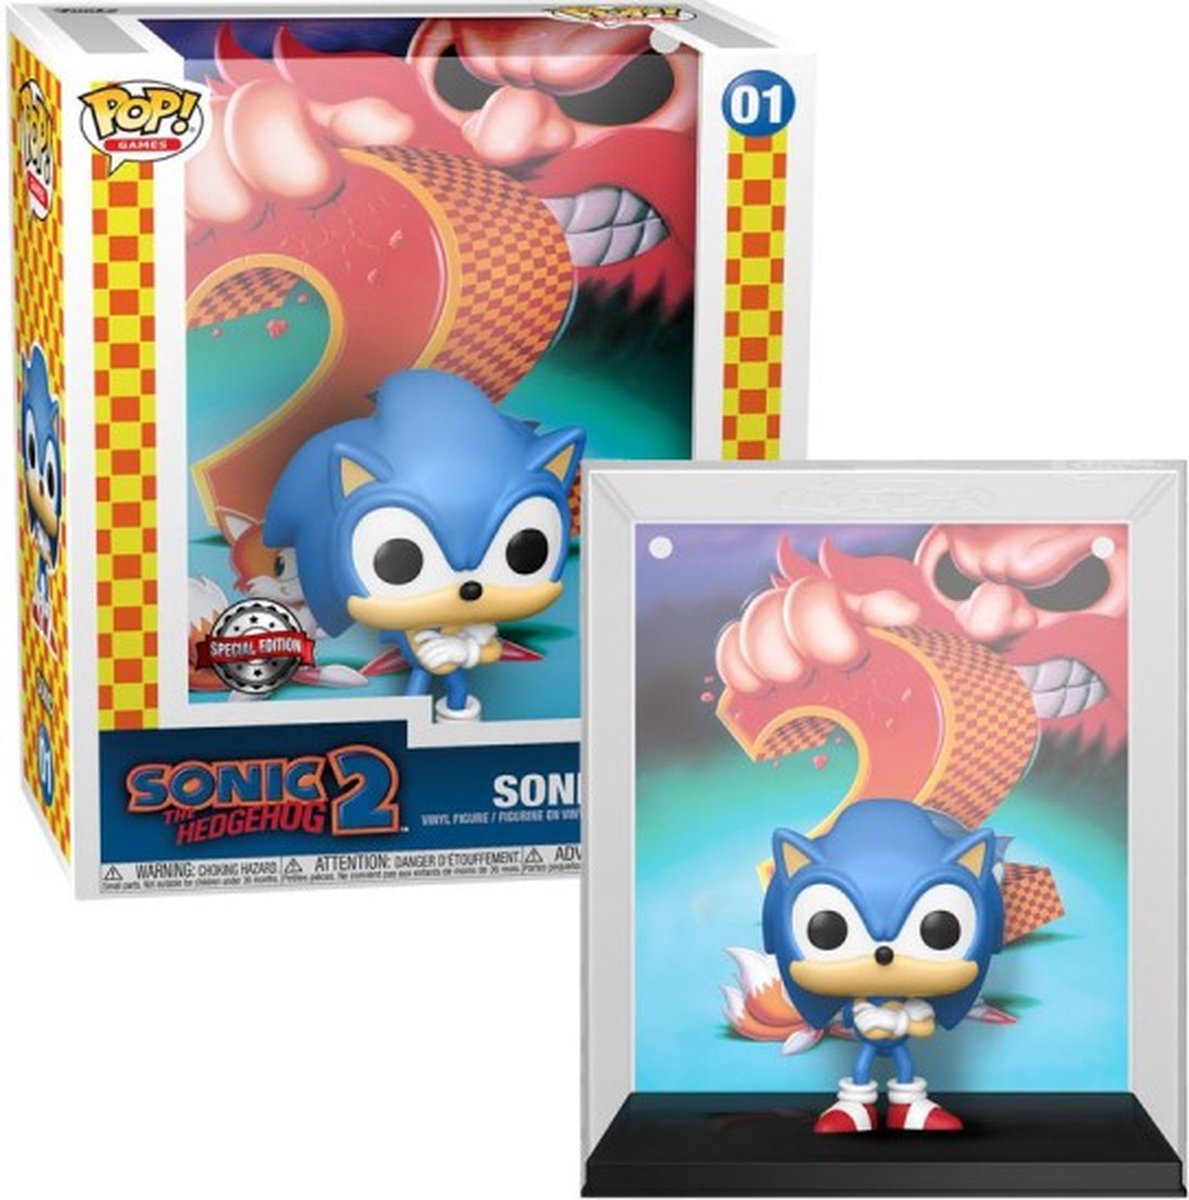   Sonic -   Pop! Game Cover - Sonic the Hedgehog Figuur